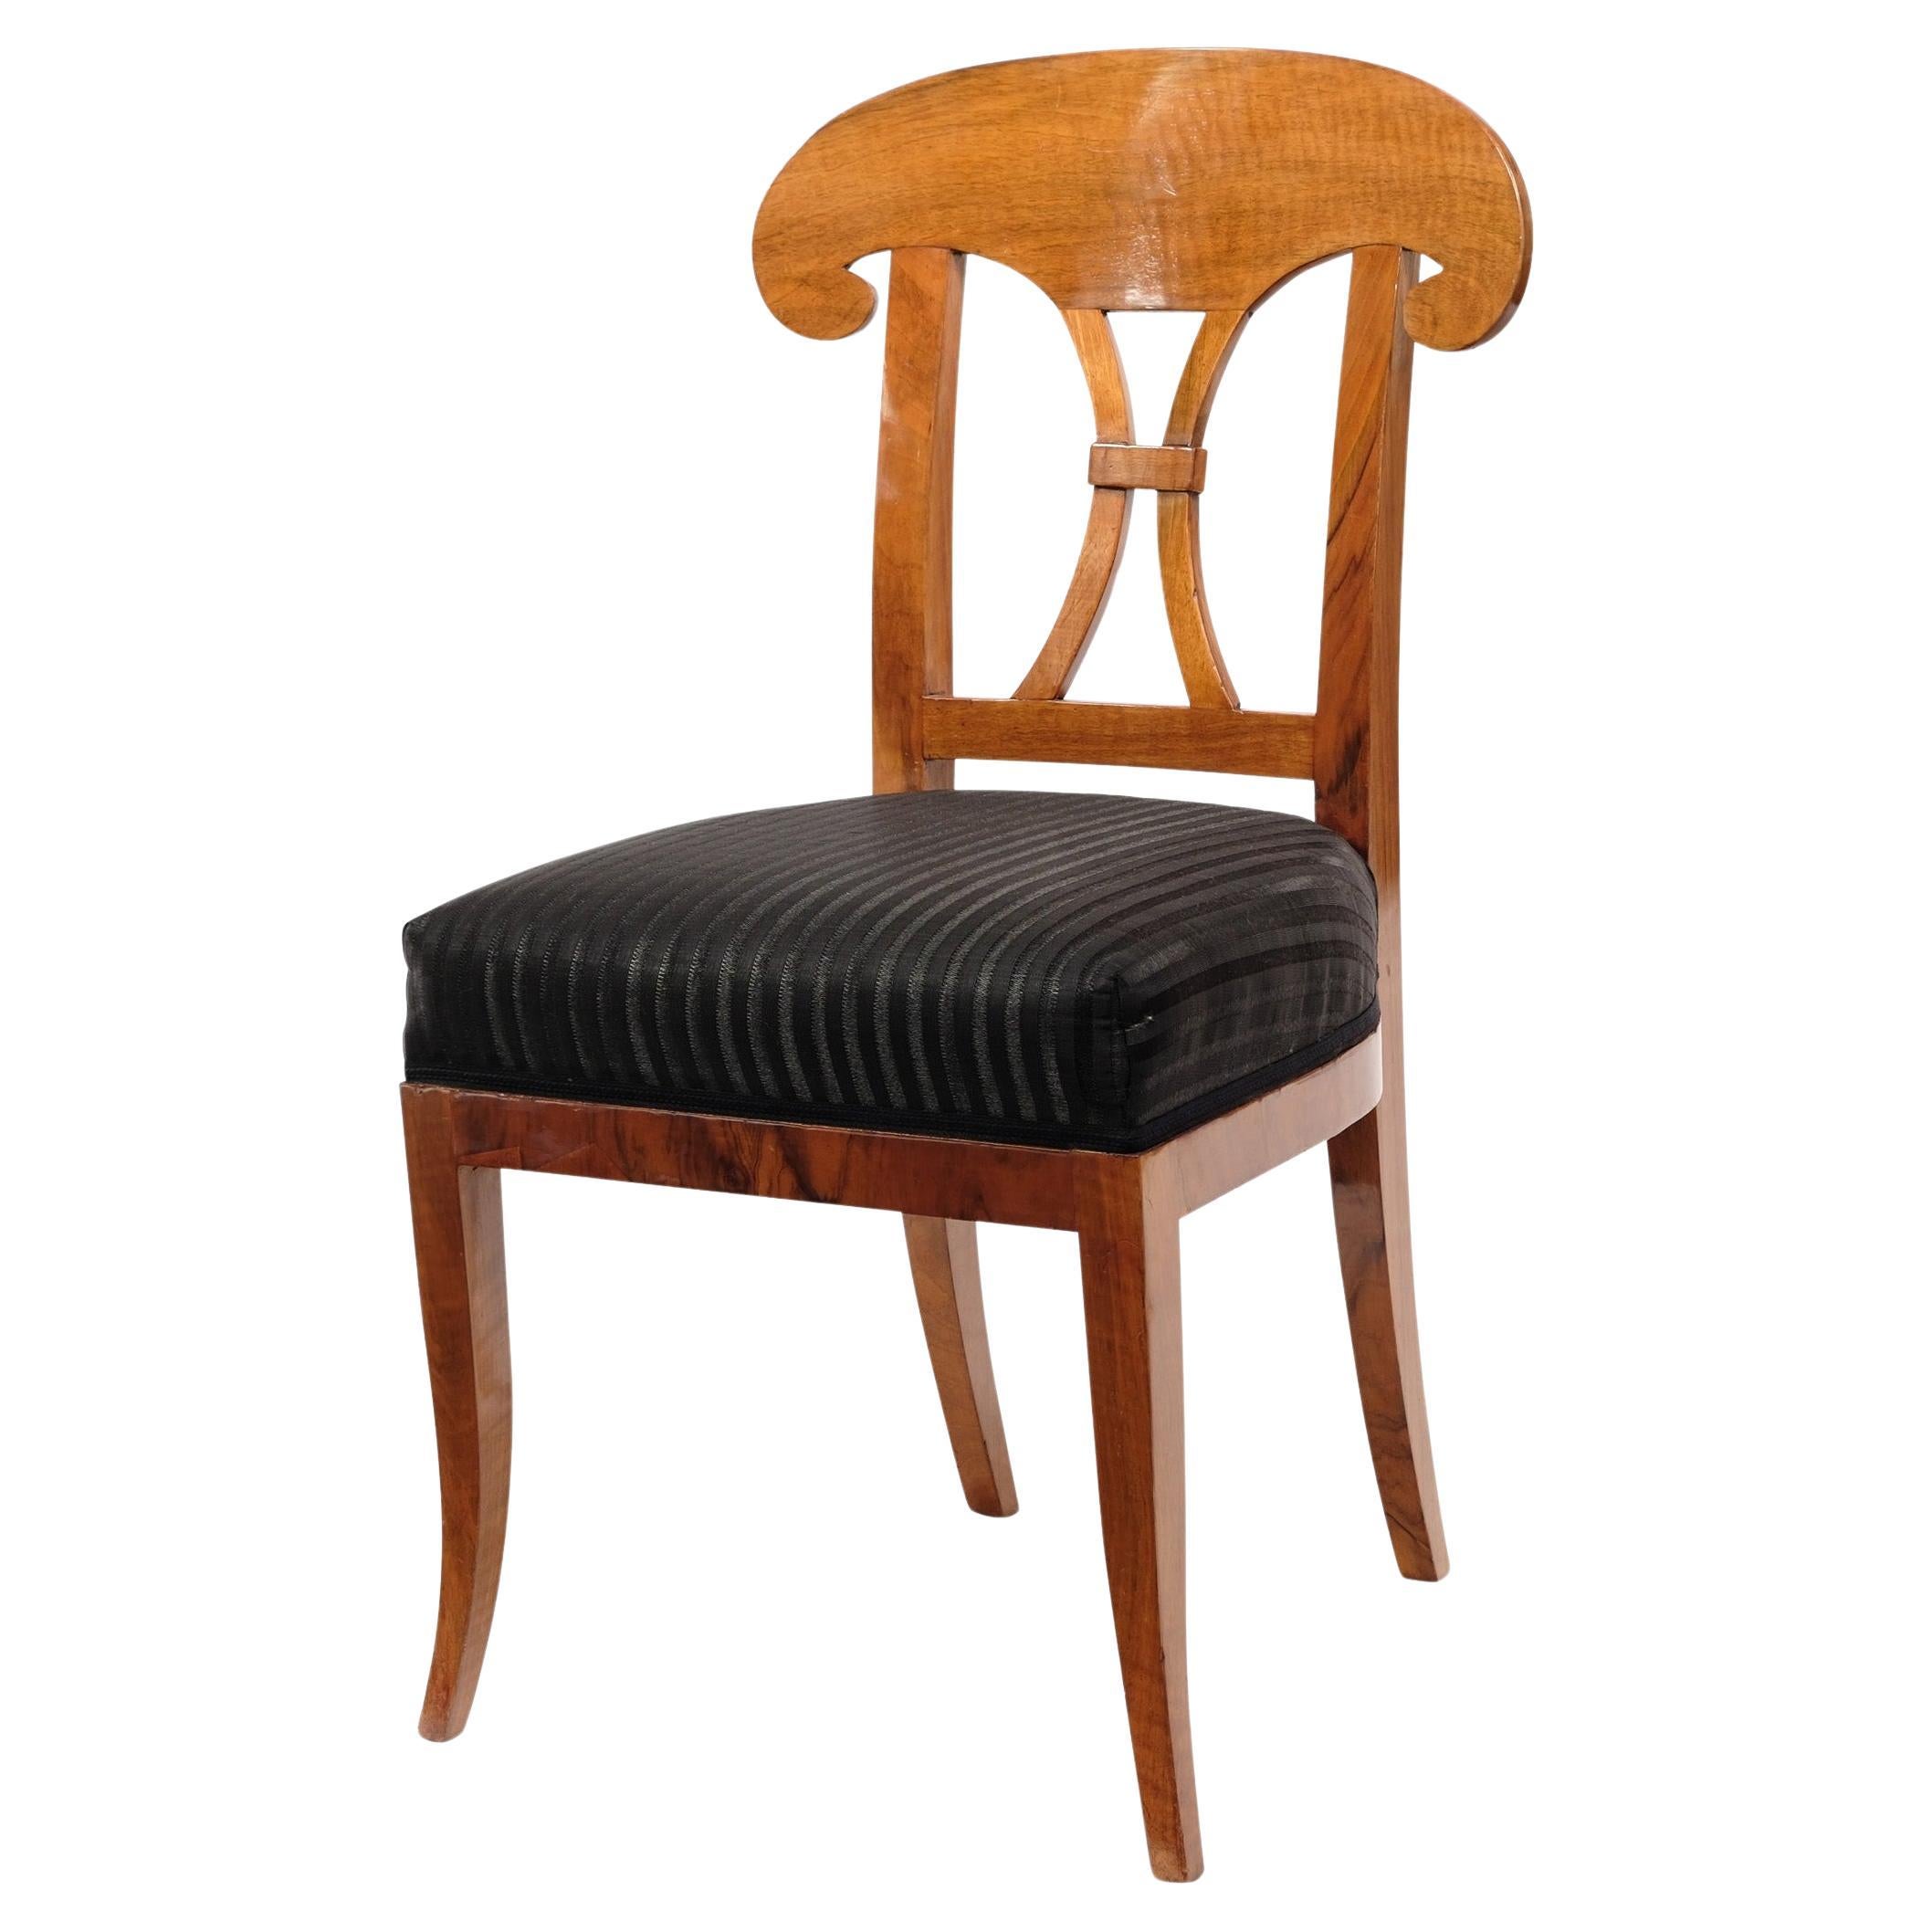 Set of 4 Biedermeier chairs with upholstered seat, around 1820, Germany, so called shovel chairs, solid walnut, newly upholstered and covered, horsehair cover, restored condition, shellac hand polish.

Height: 86 cm, width: 45 cm, depth: 40 cm,